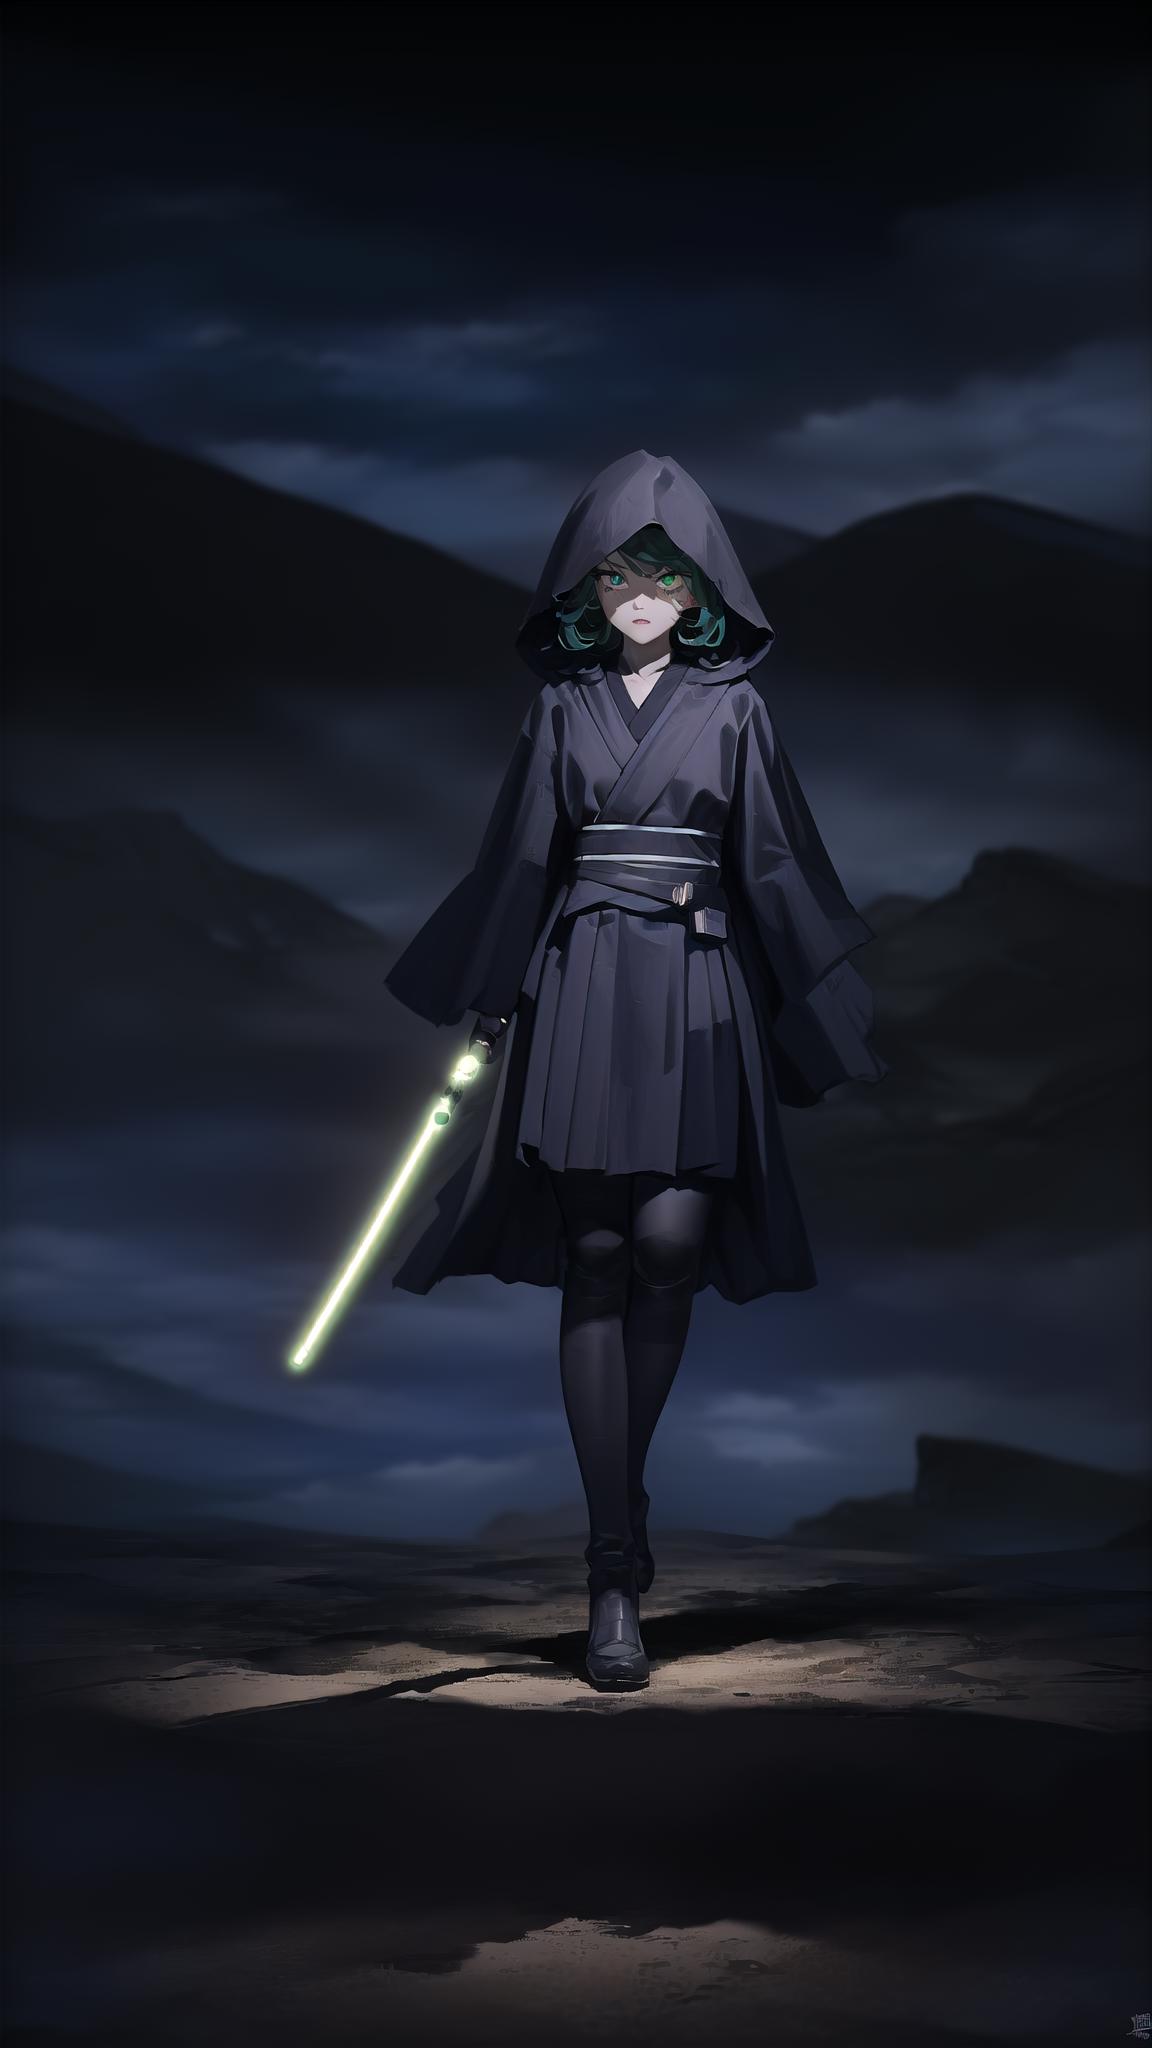 Star Wars sith outfit image by Wolfdua